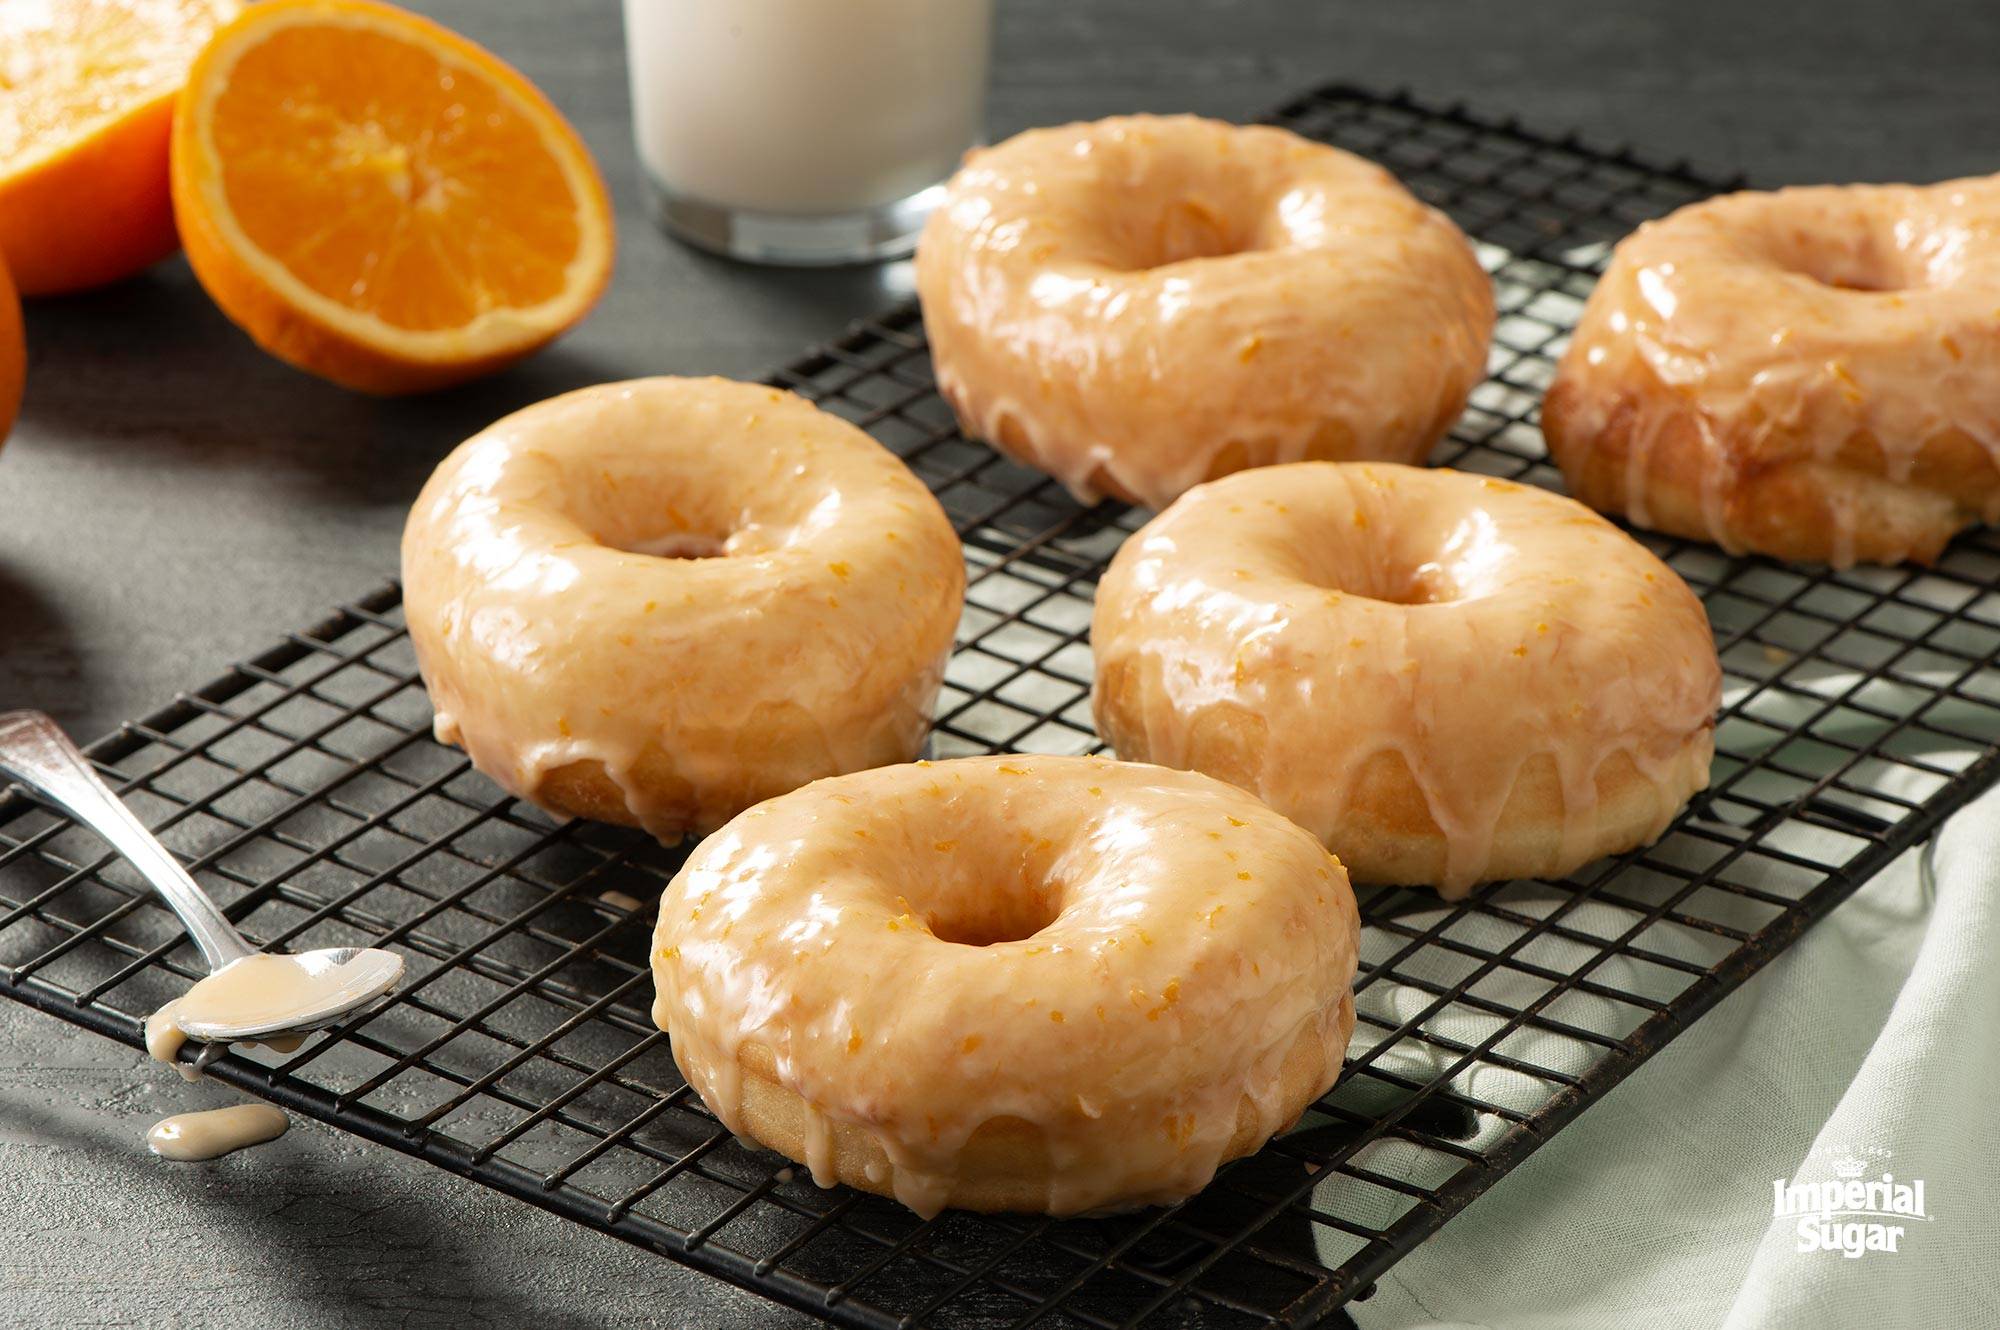 There's a reason the classic yeast donut is considered the gold st...